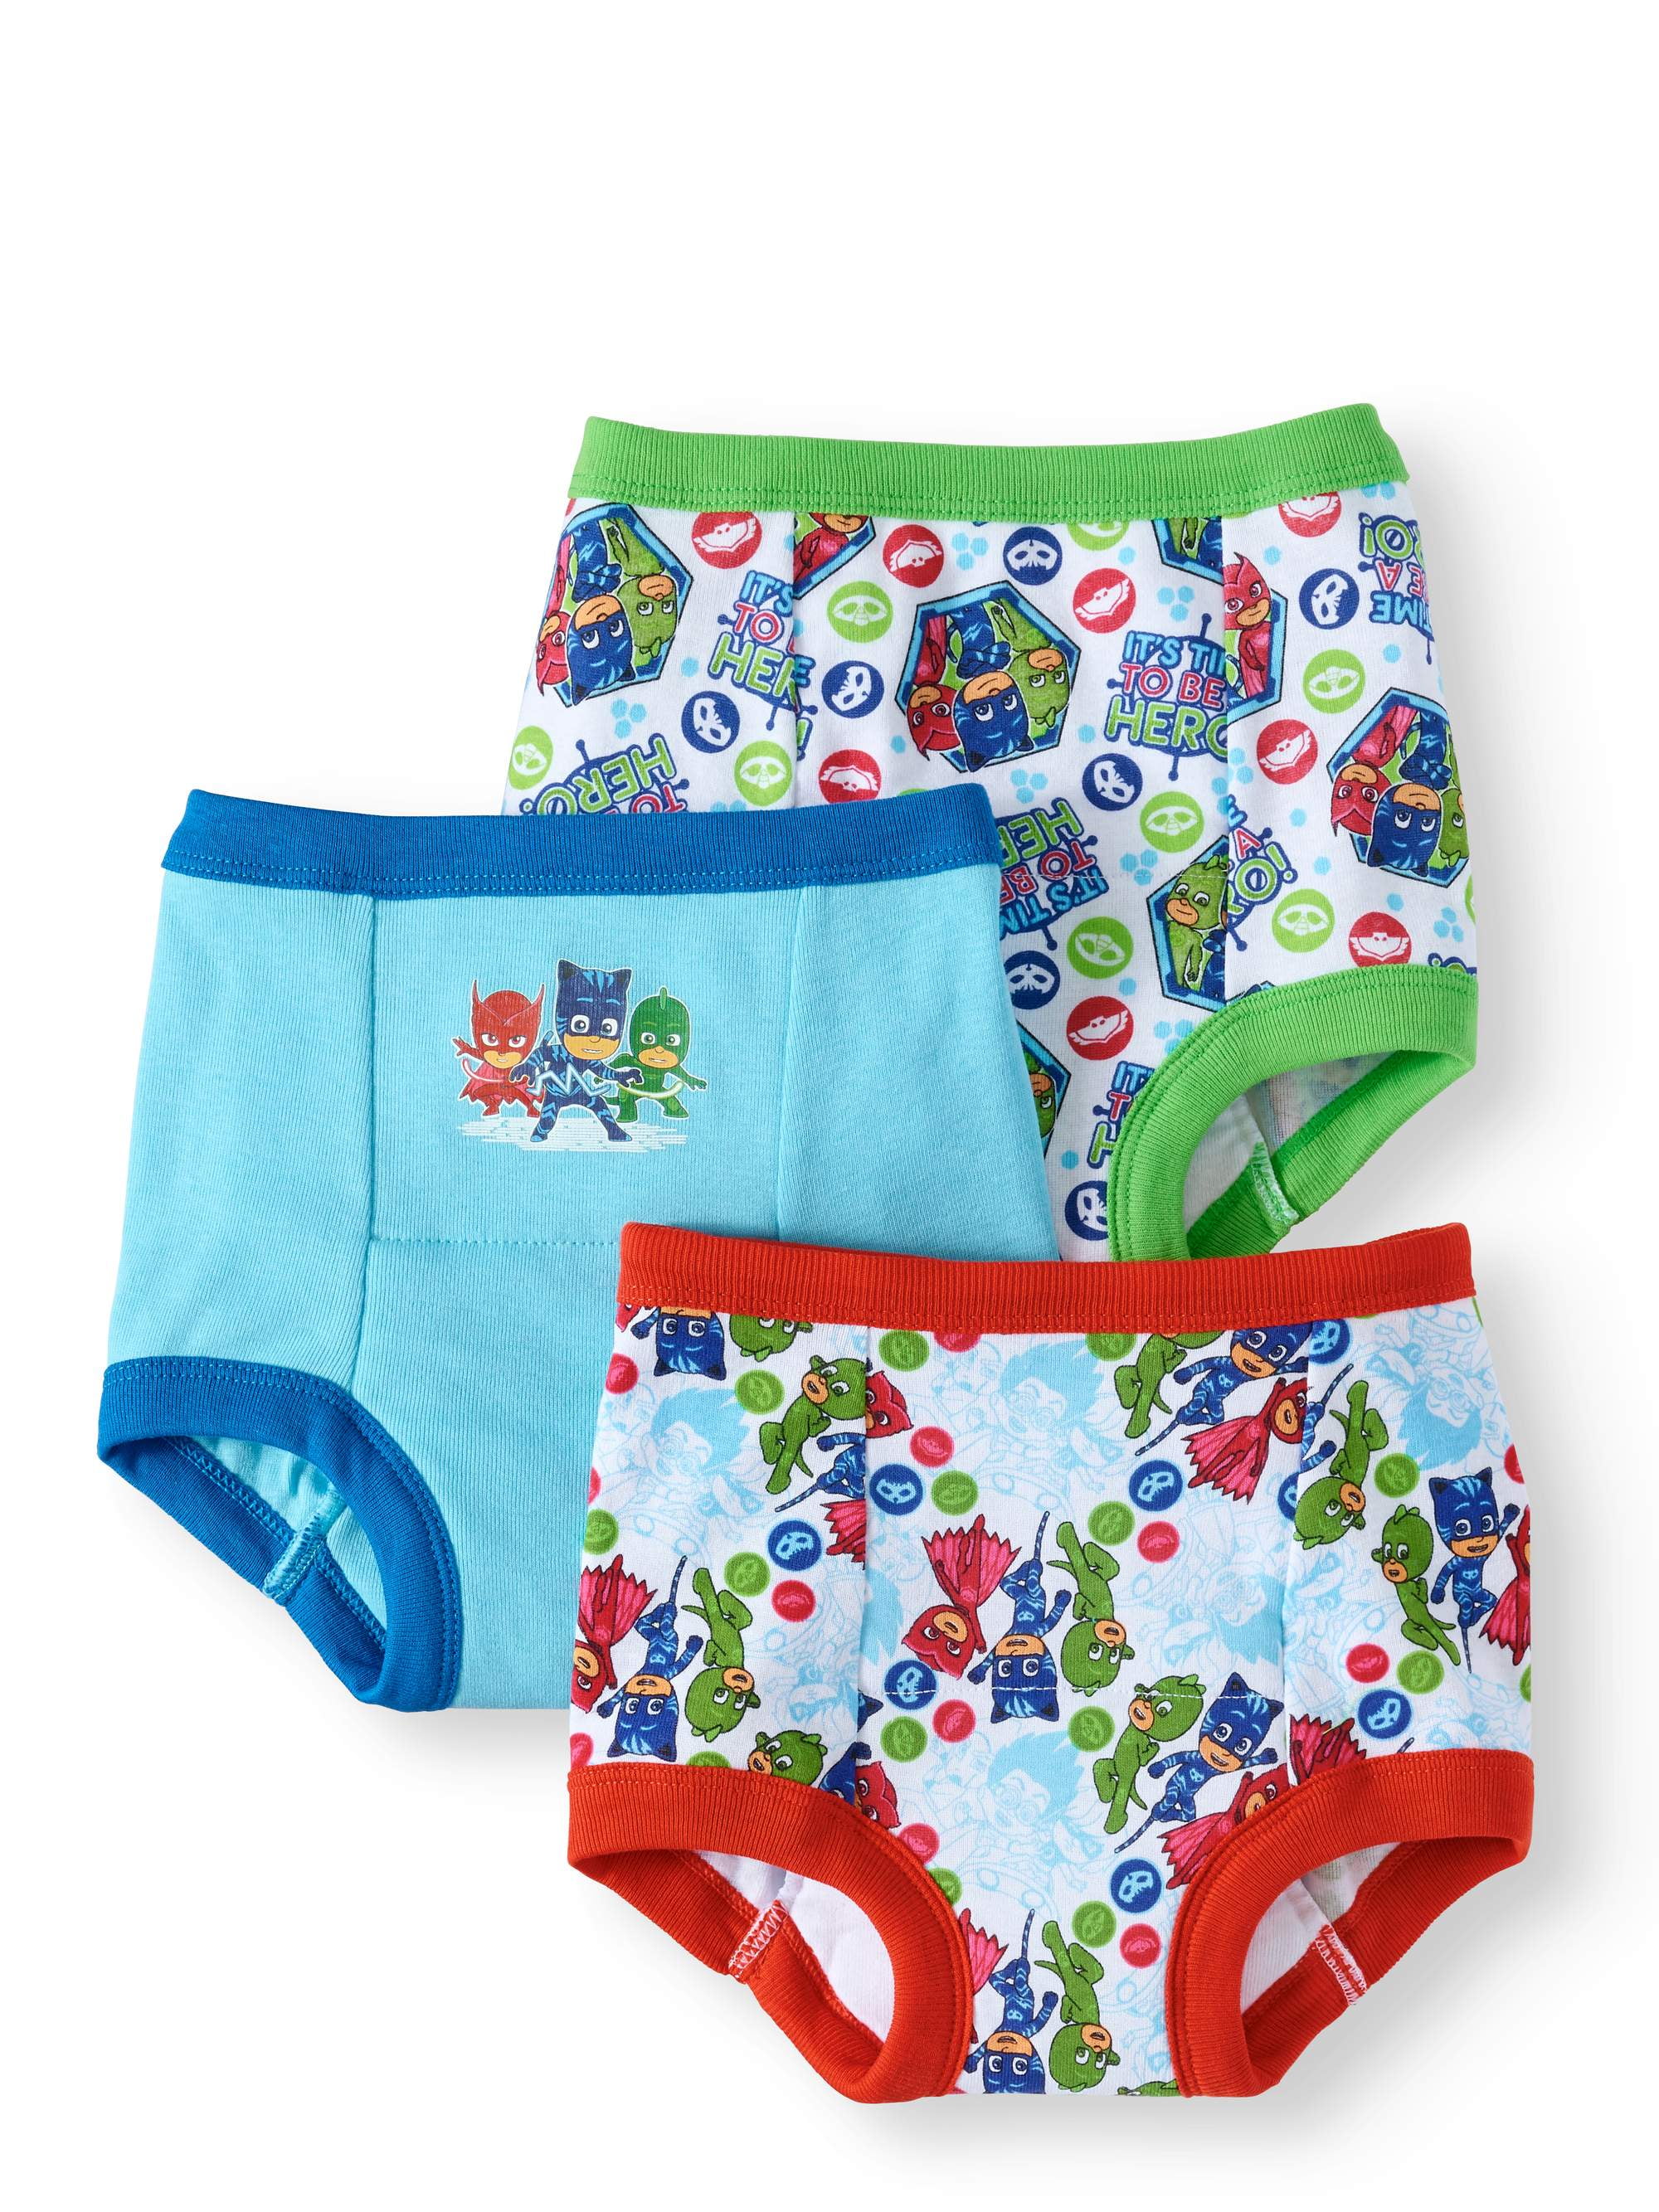 Shop Underwear Pj Masks with great discounts and prices online